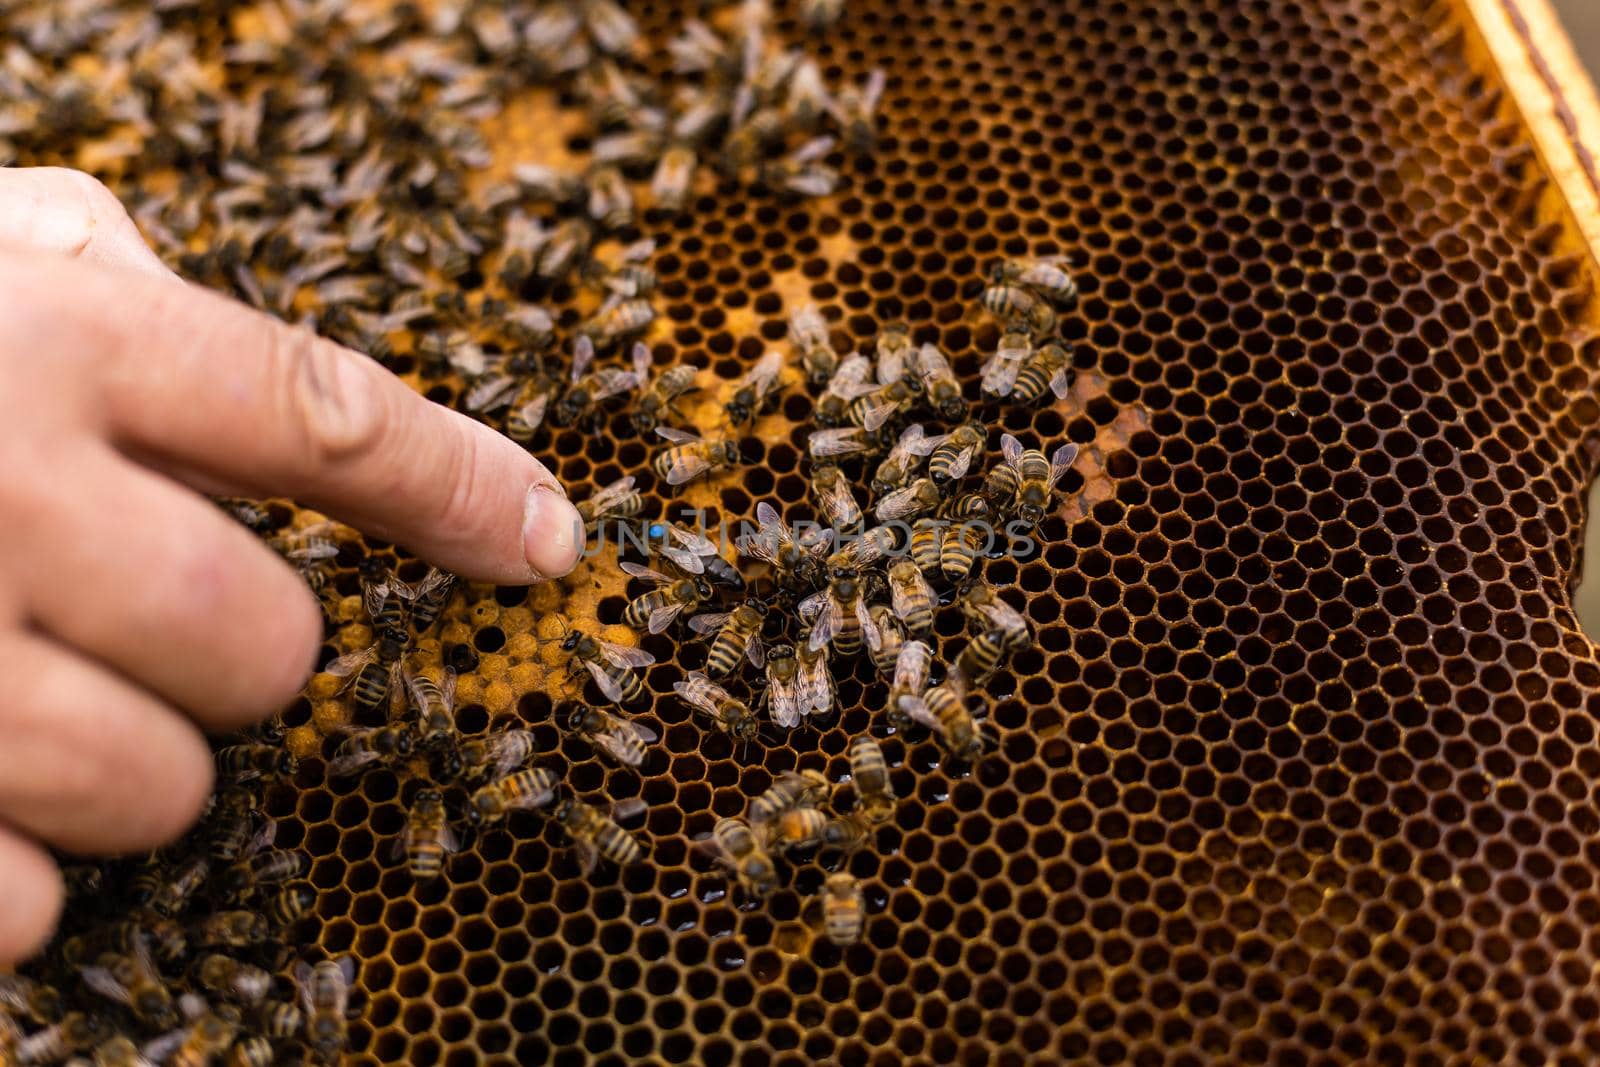 An elderly beekeeper examines the frames with bees near the hives.